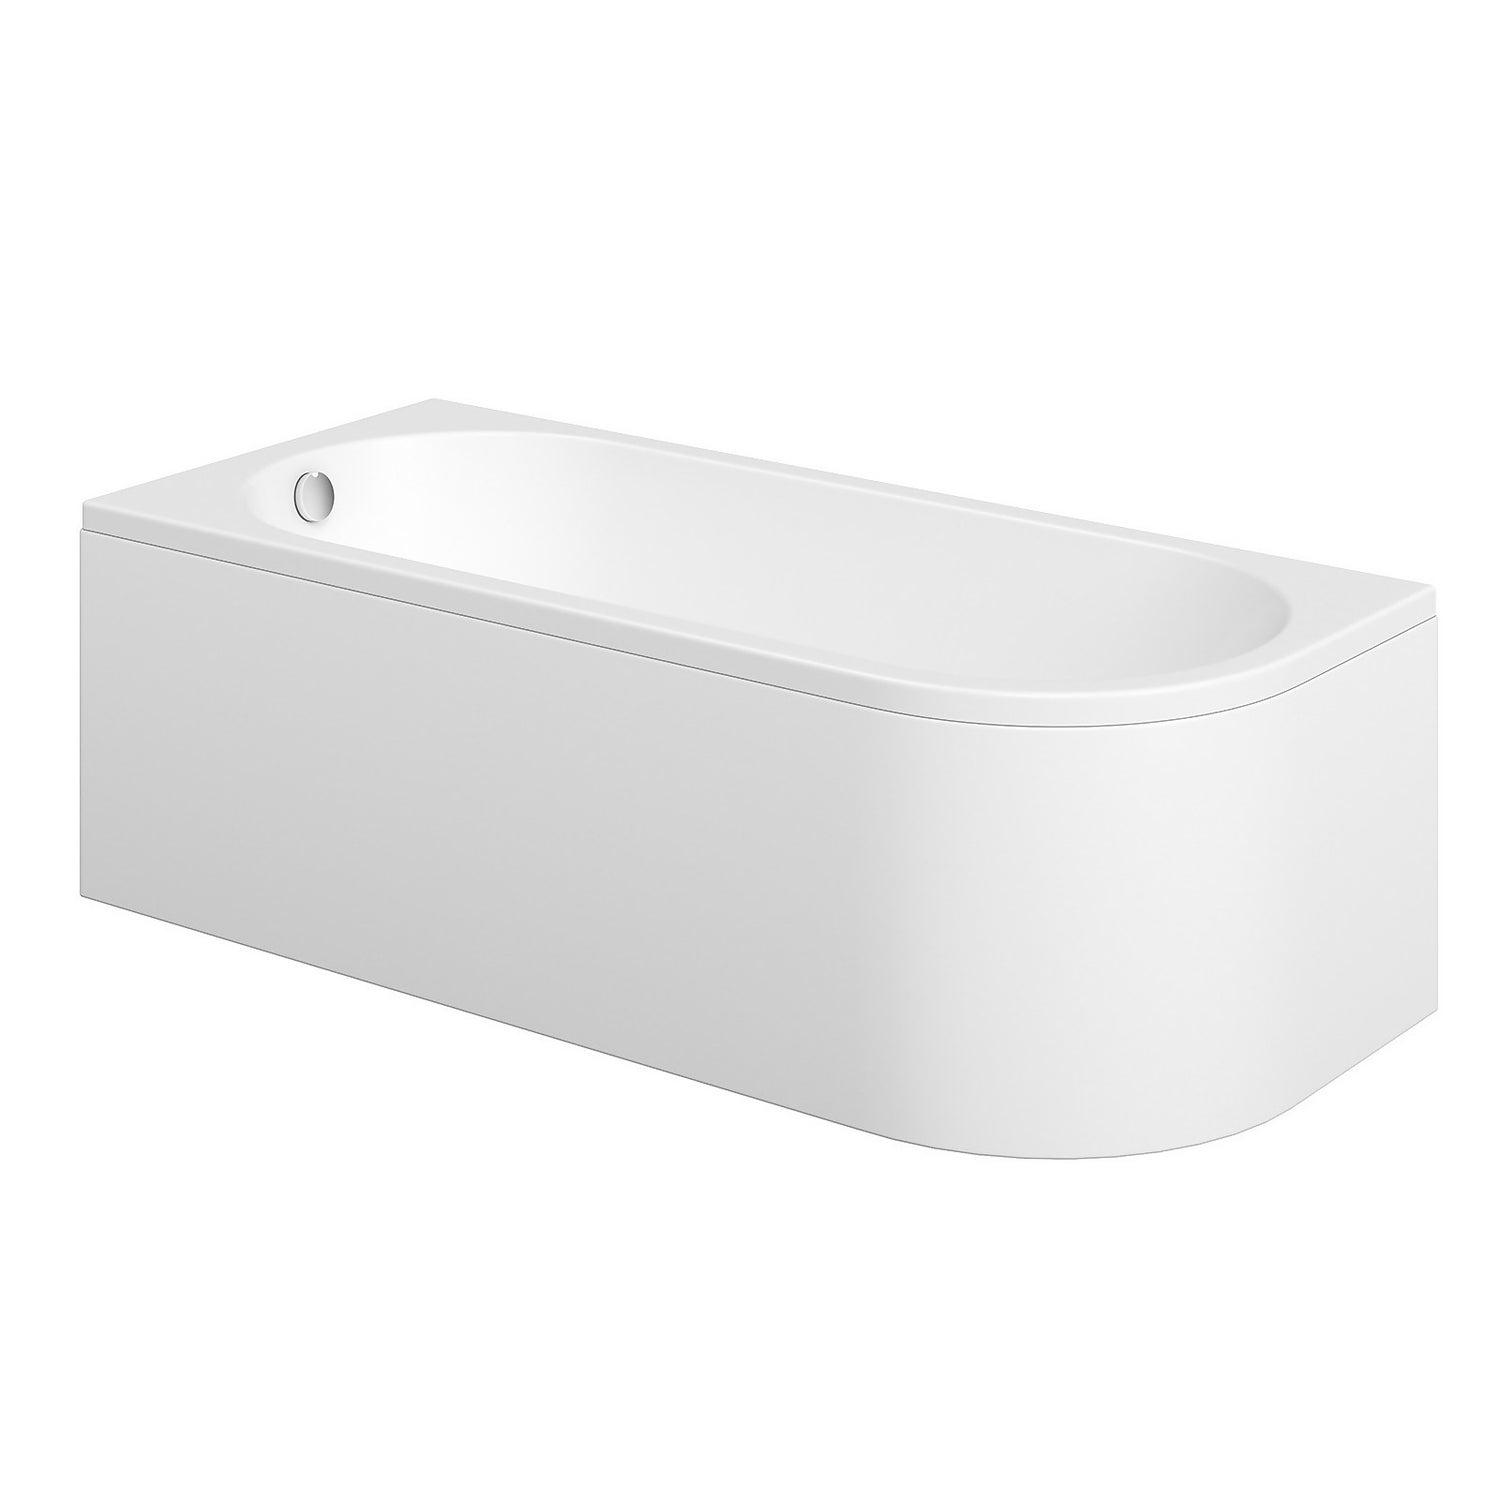 Indus White Left Hand Small Corner Bath with Panel - 1500 x 750mm